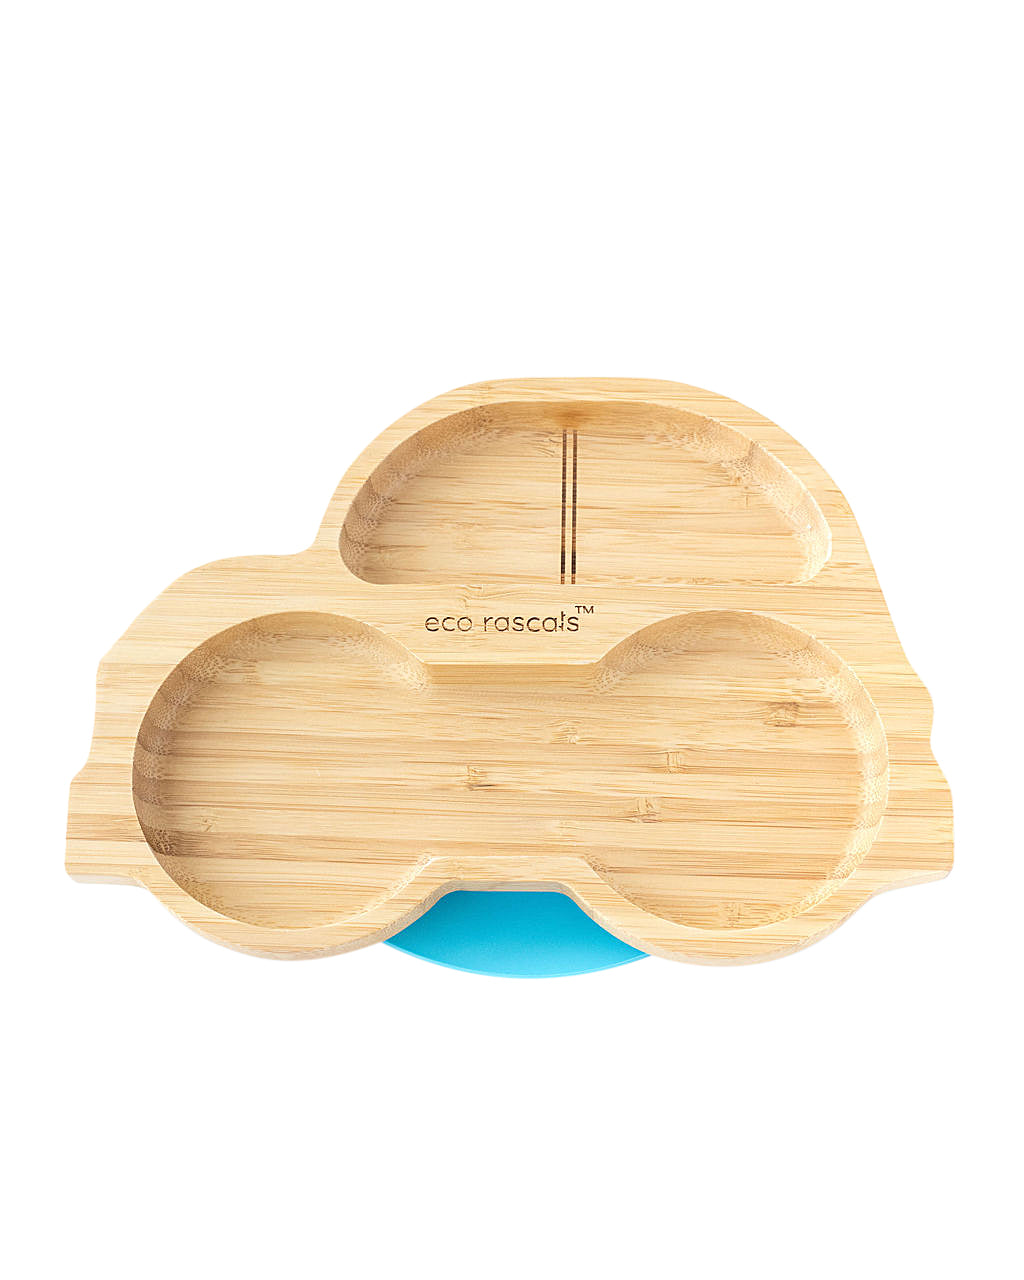 Bamboo Car Suction Plate - Blue